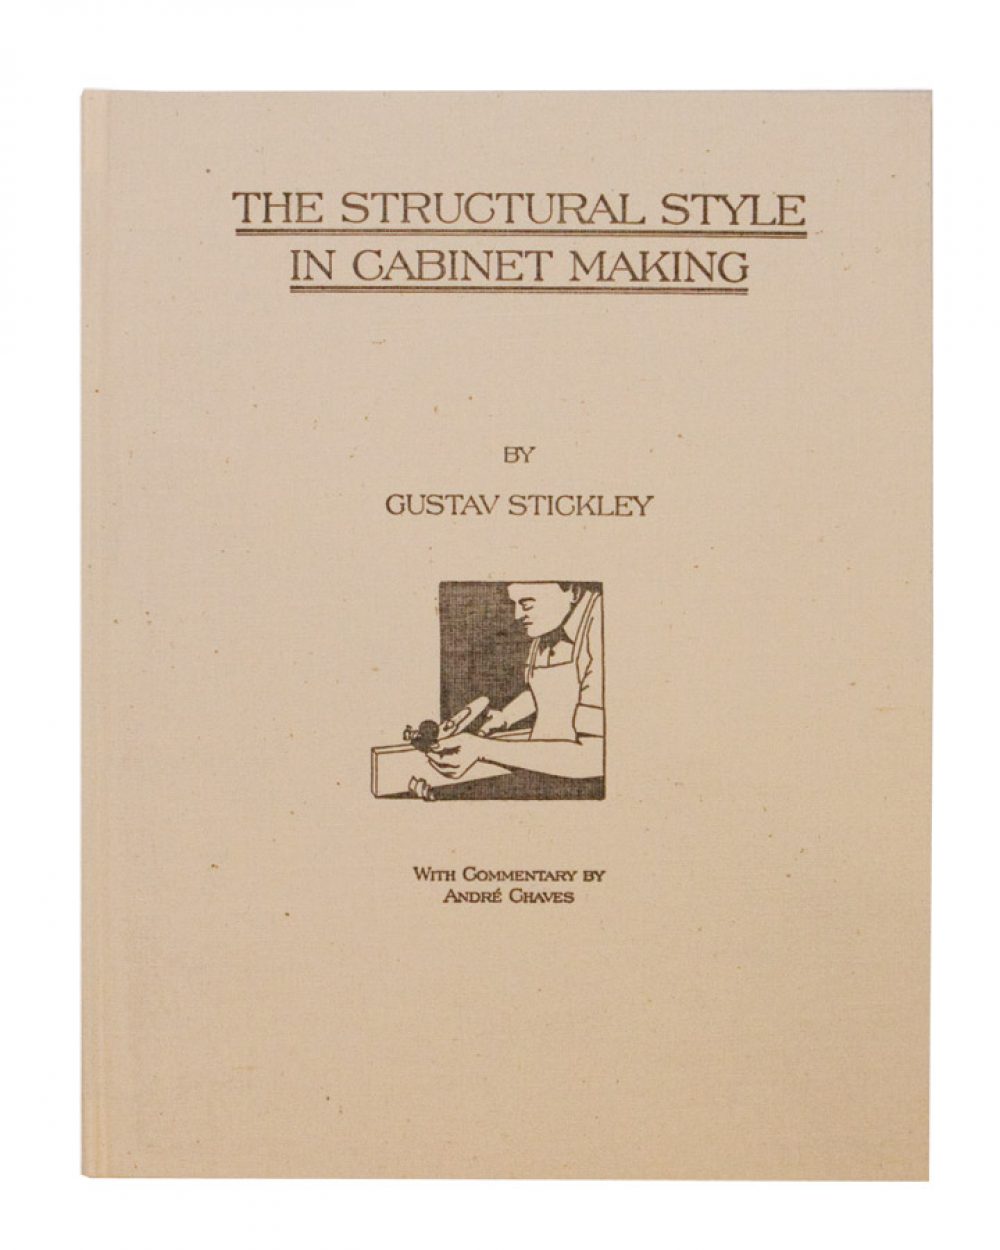 The Structural Style in Cabinet Making by Gustav Stickley